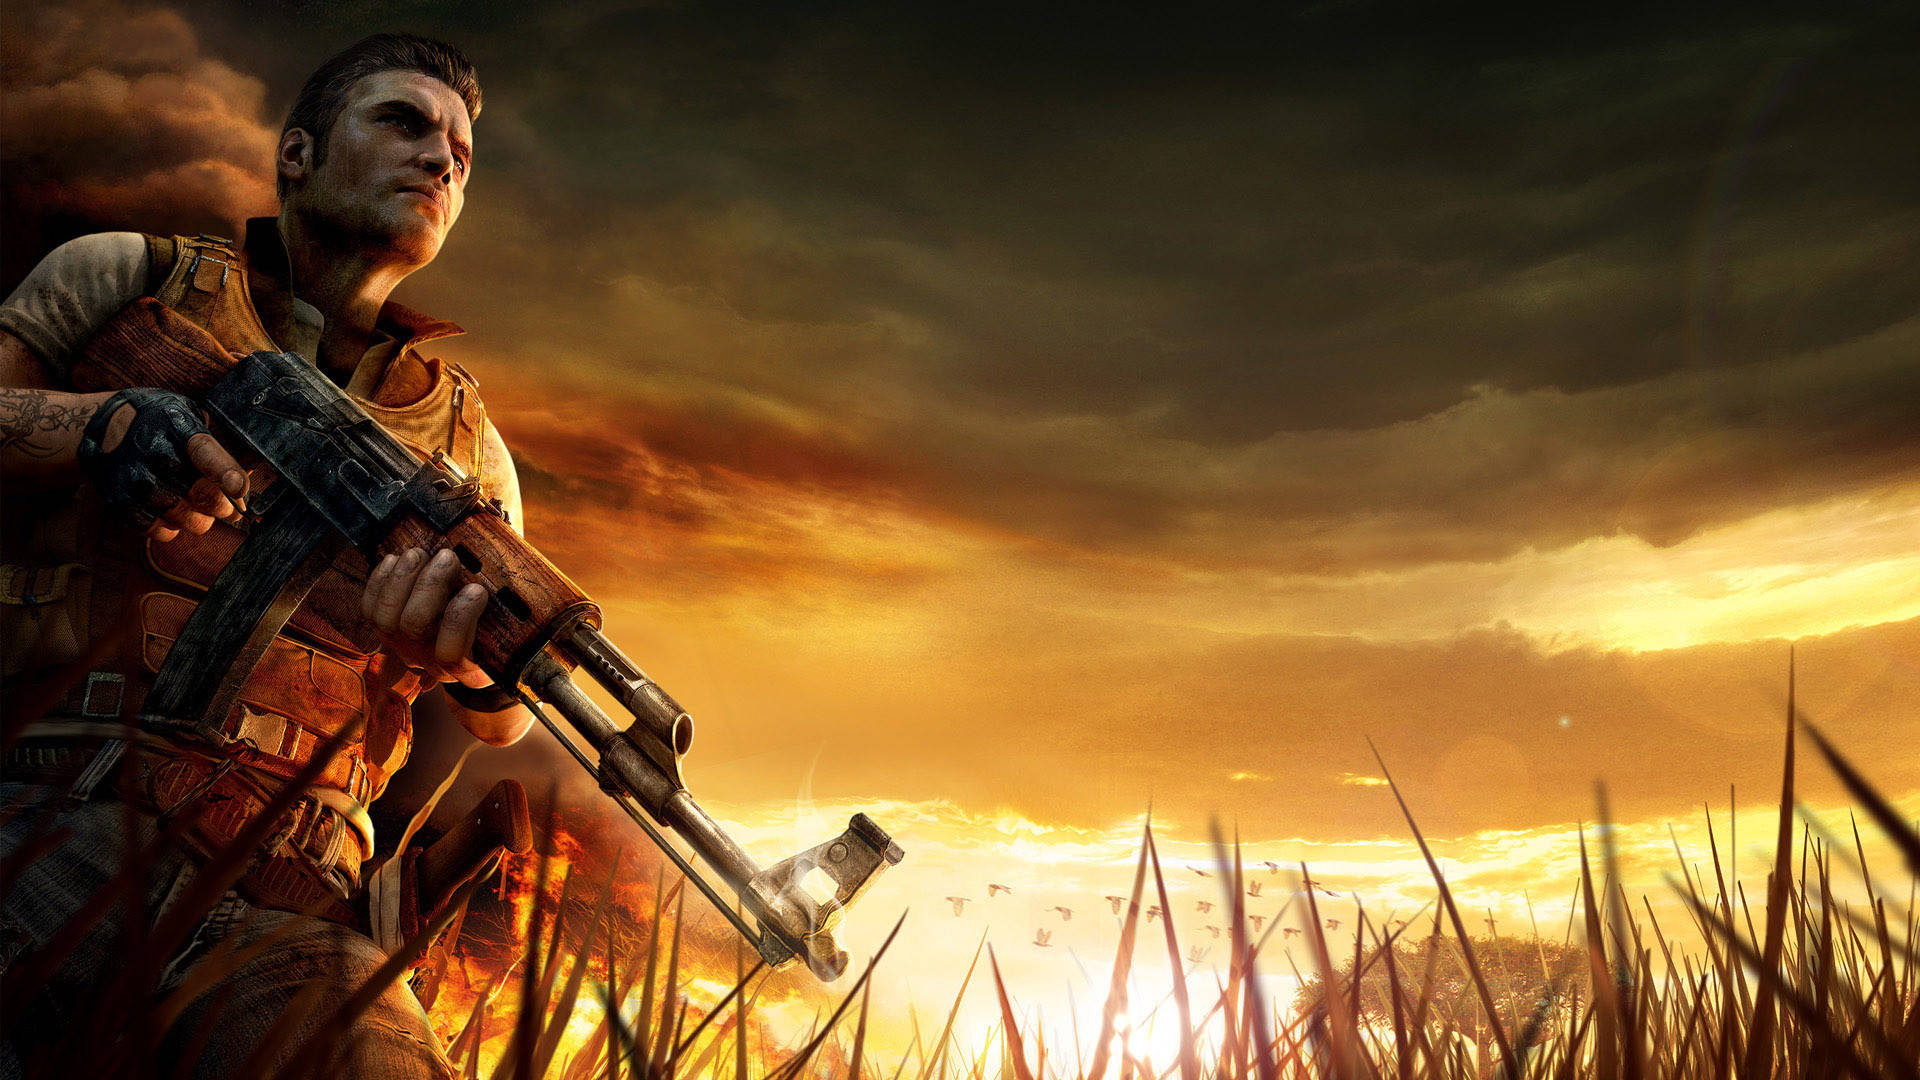 Farcry 2 Hd Gaming Wallpaper